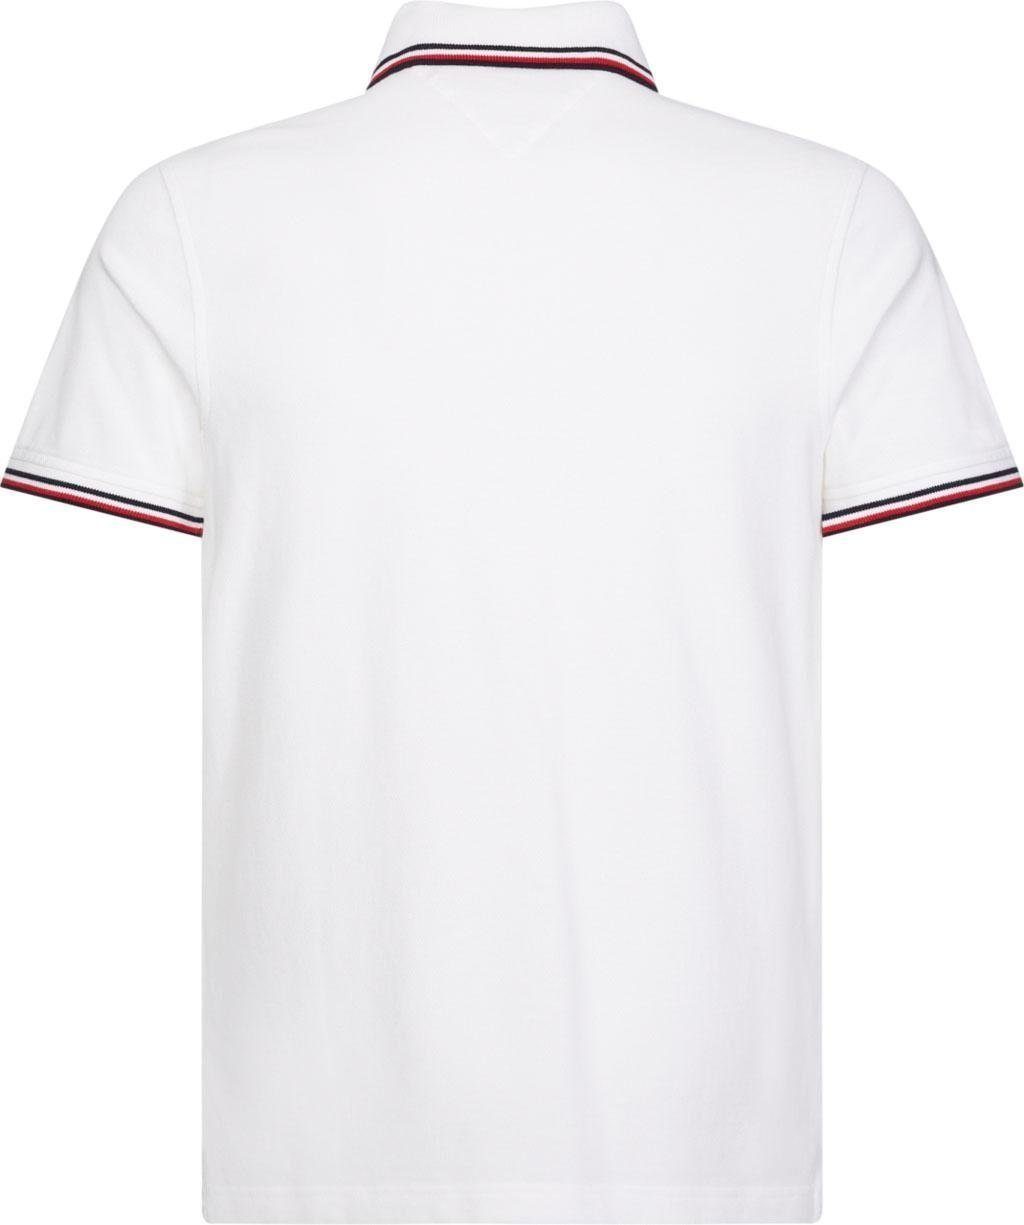 TOMMY SLIM TIPPED Poloshirt Hilfiger Tommy POLO white